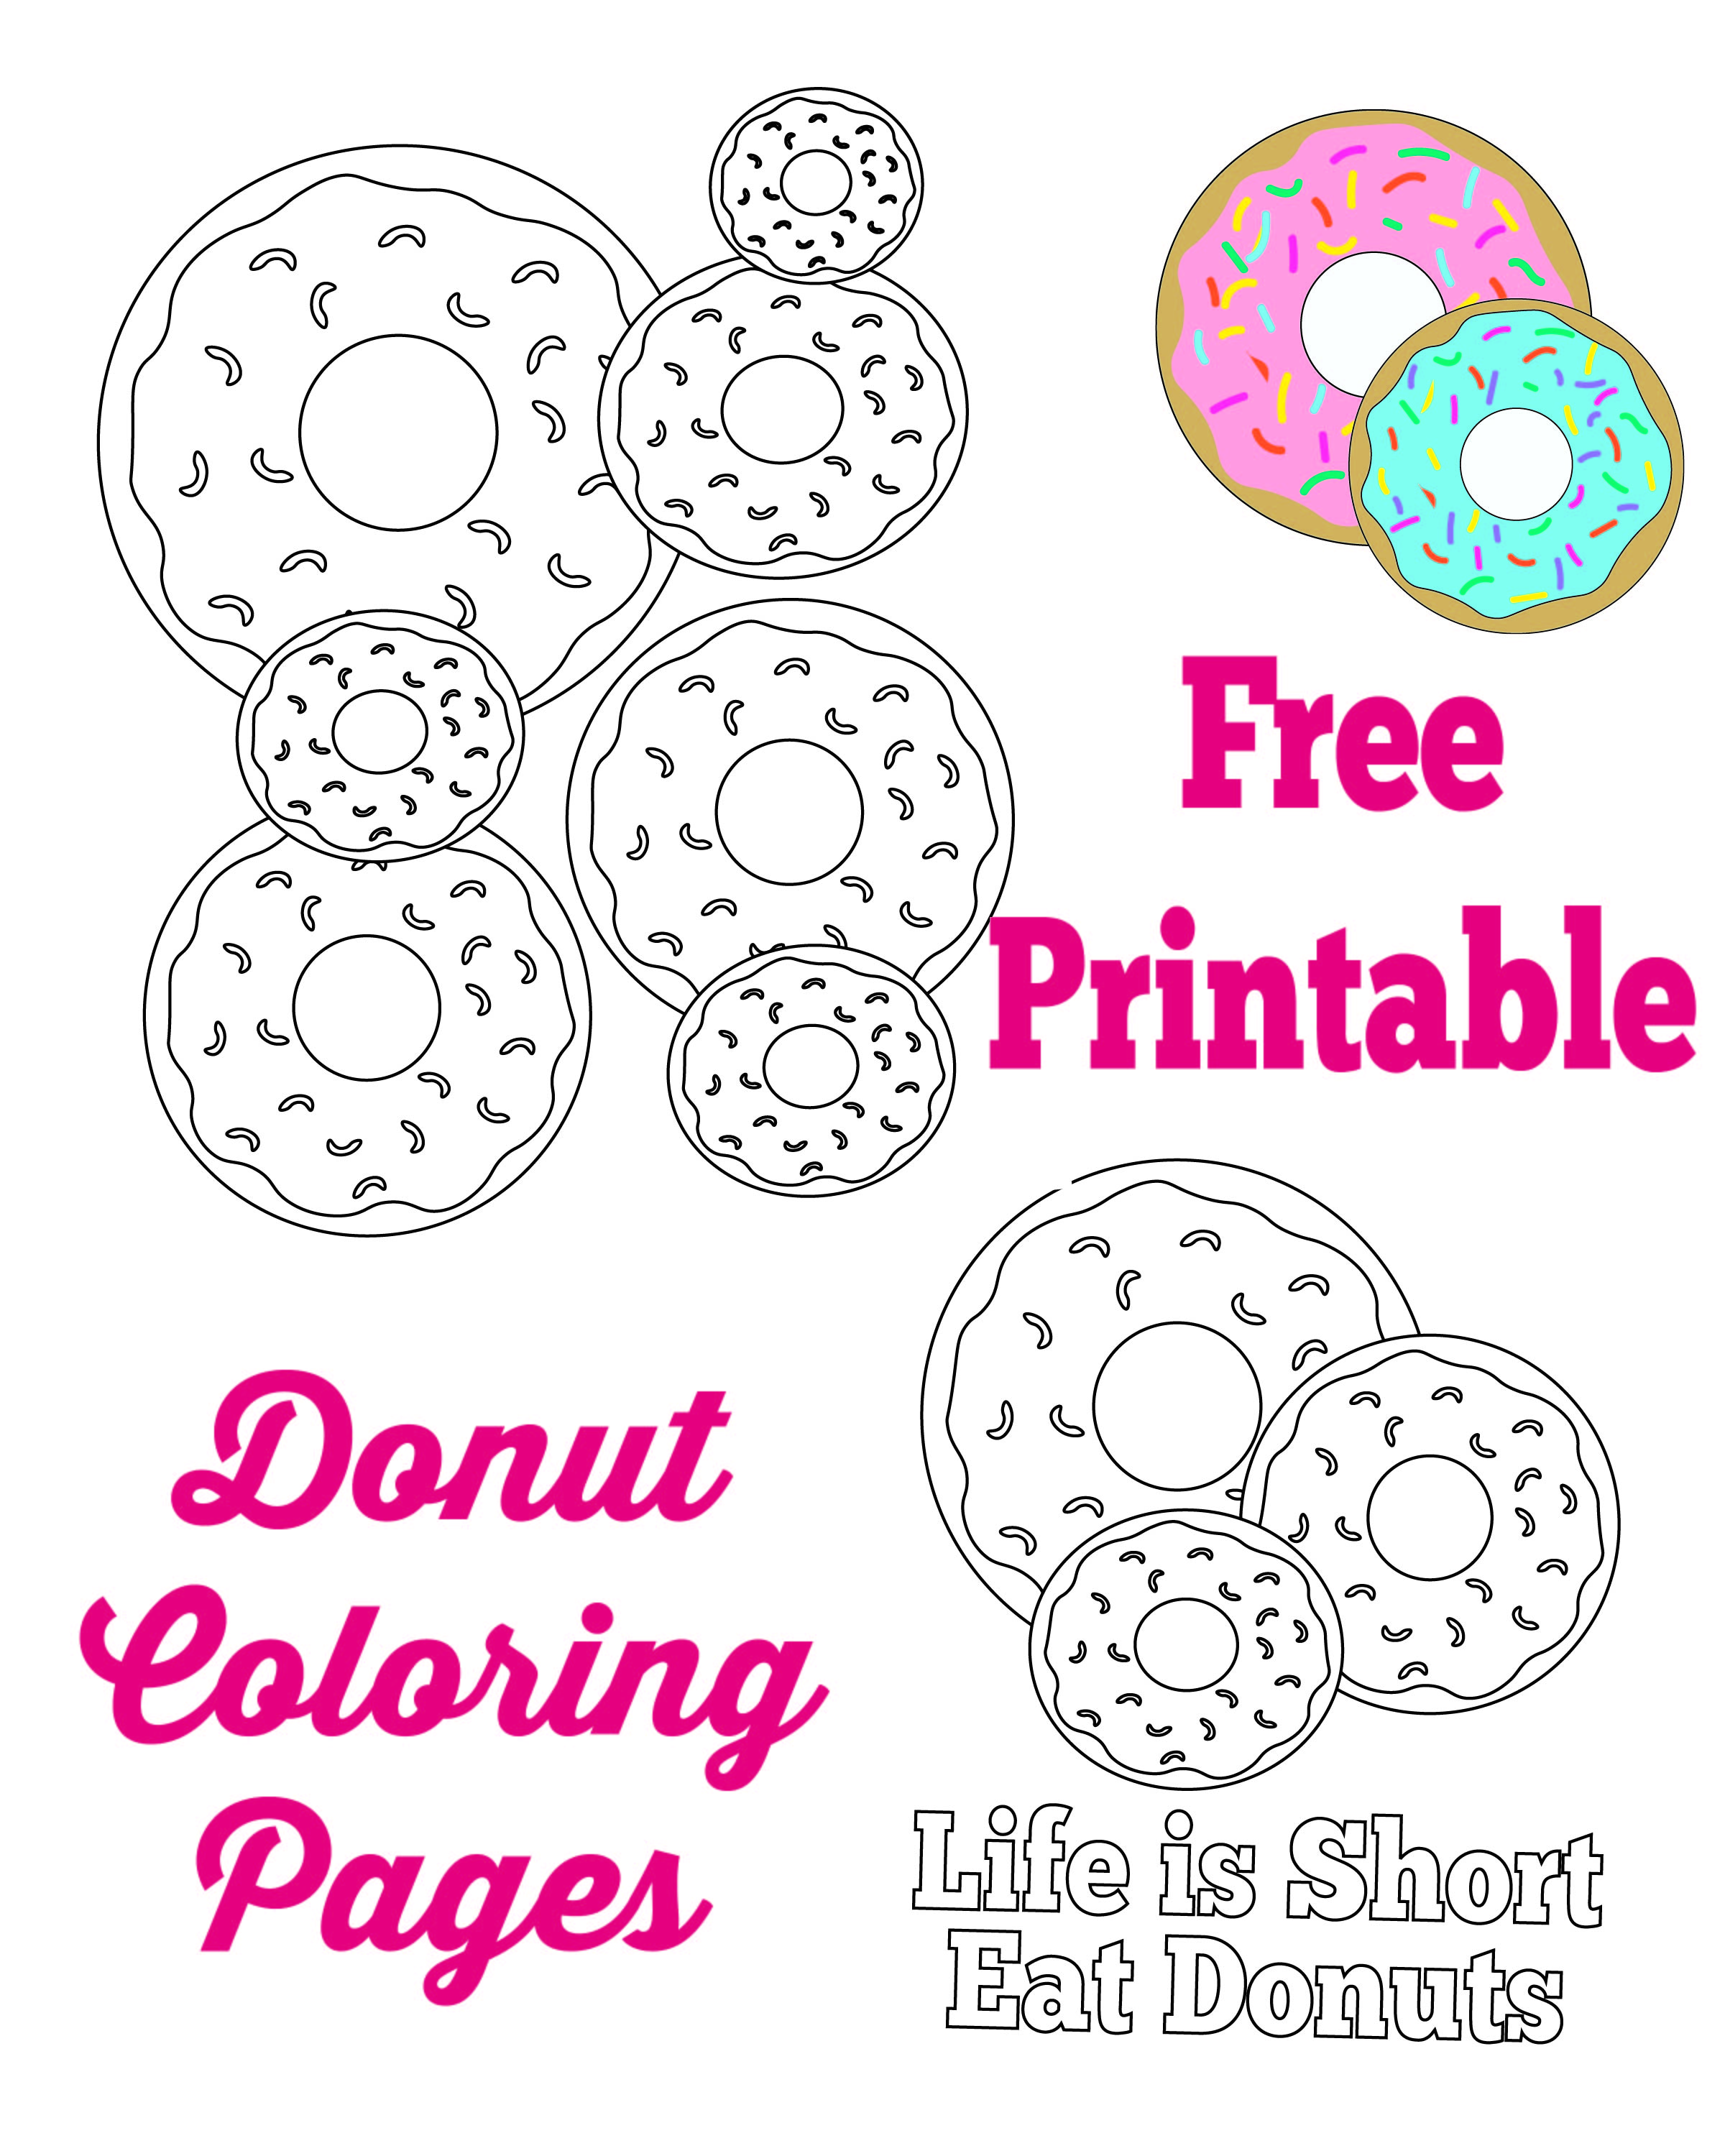 Donut Coloring Pages and Party Sign   Mandy's Party Printables